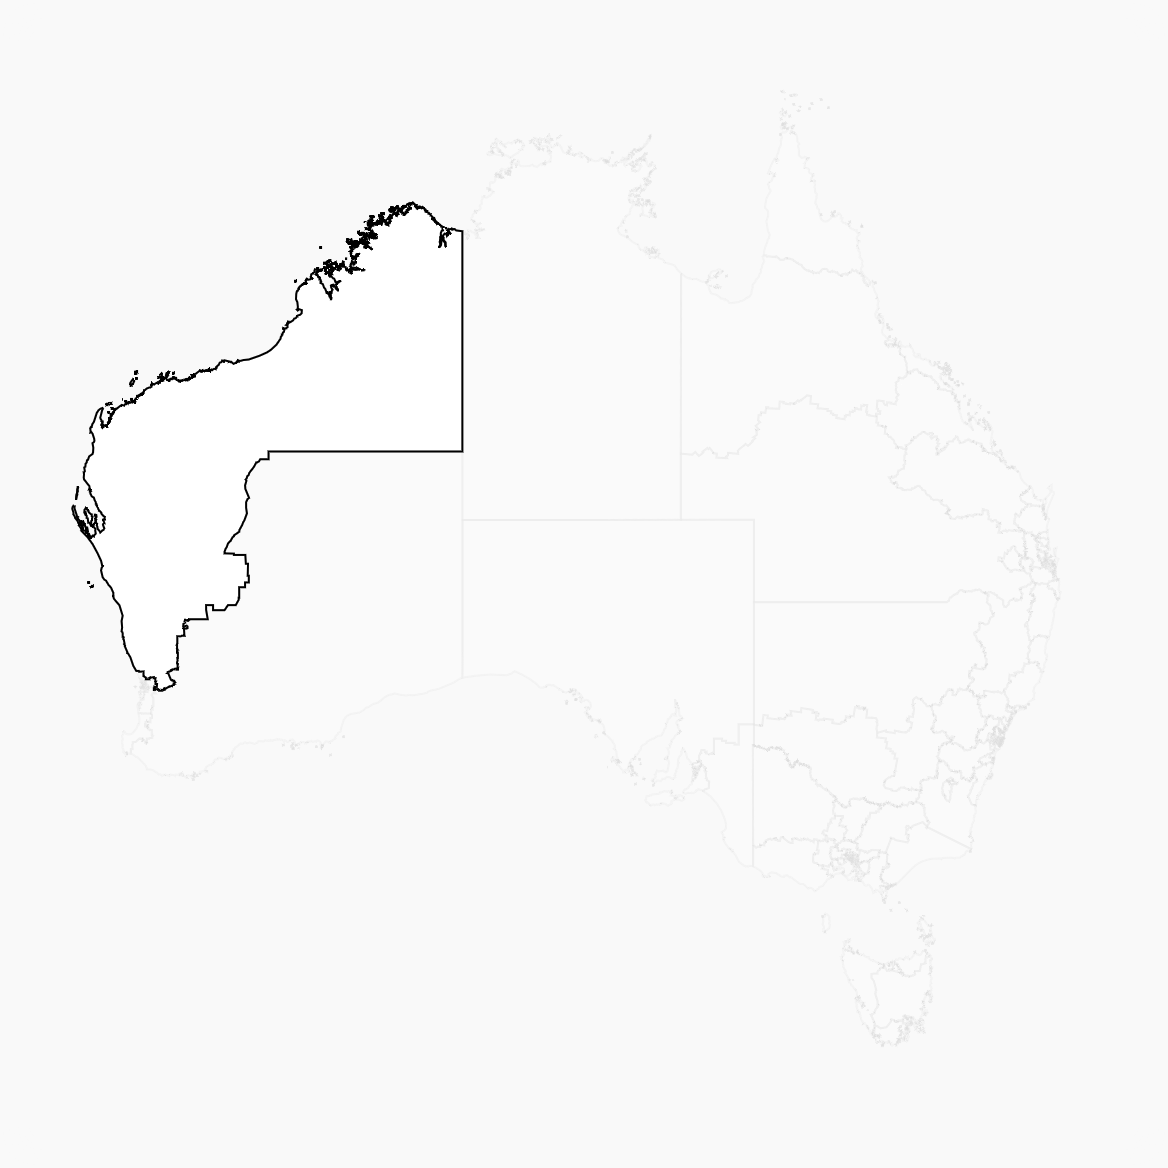 The rest of the map fades out, leaving just the seat of Durack that is more than half the size of WA.